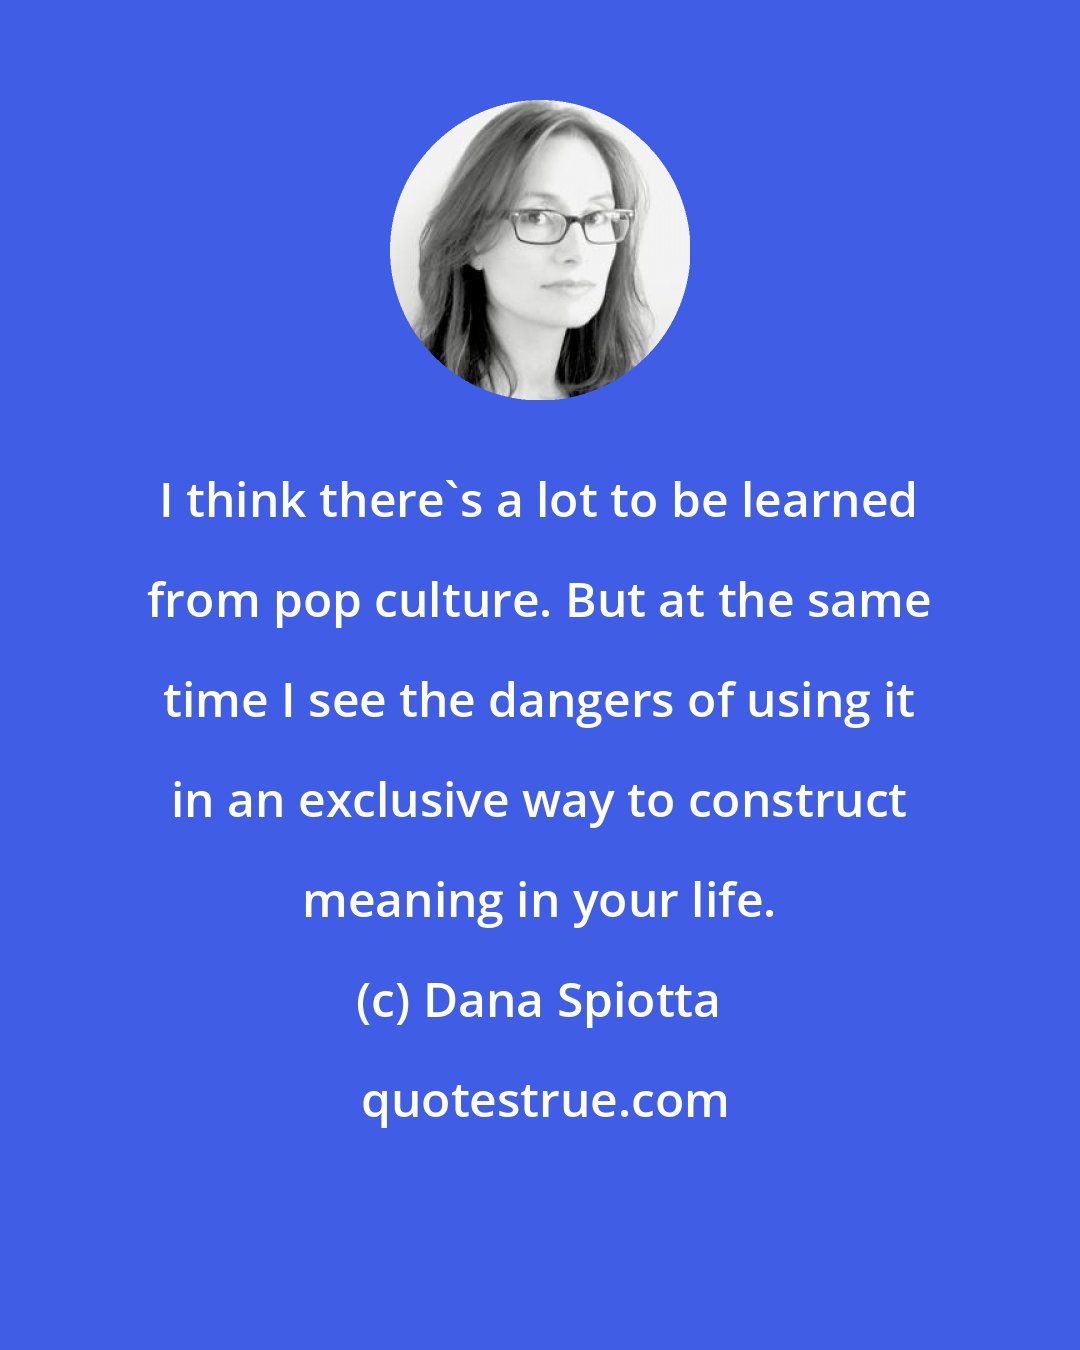 Dana Spiotta: I think there's a lot to be learned from pop culture. But at the same time I see the dangers of using it in an exclusive way to construct meaning in your life.